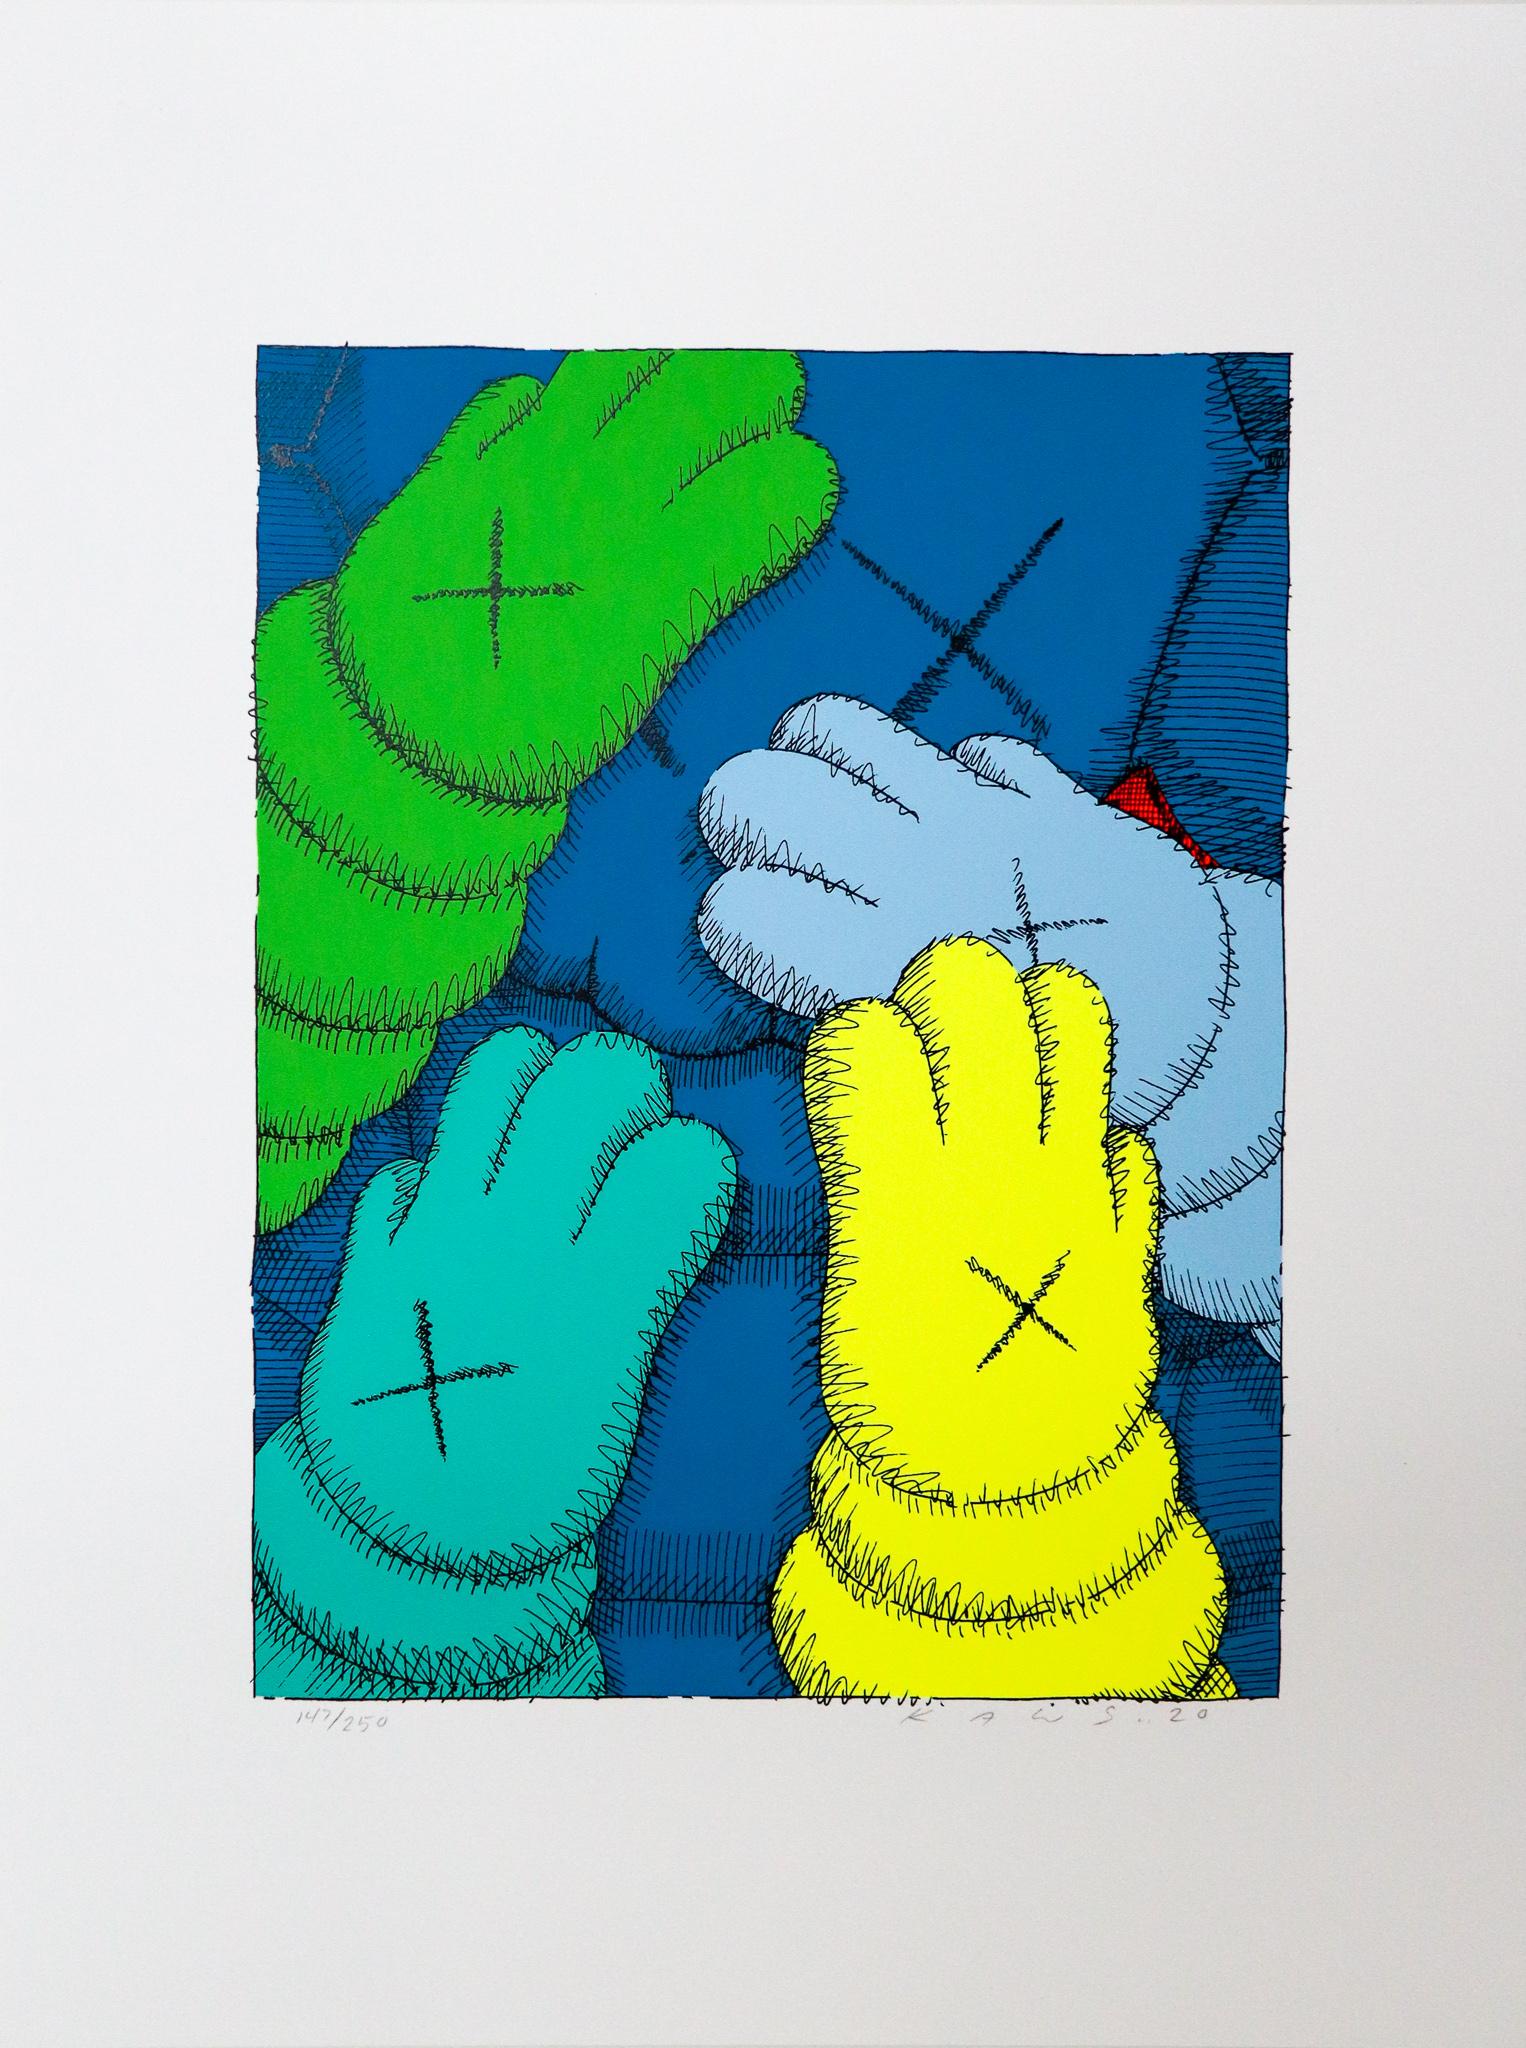 KAWS
Untitled from Urge (Powder Blue)
From the rare limited edition of 250
Original Screen print on paper
Hand signed and numbered
MINT Condition
